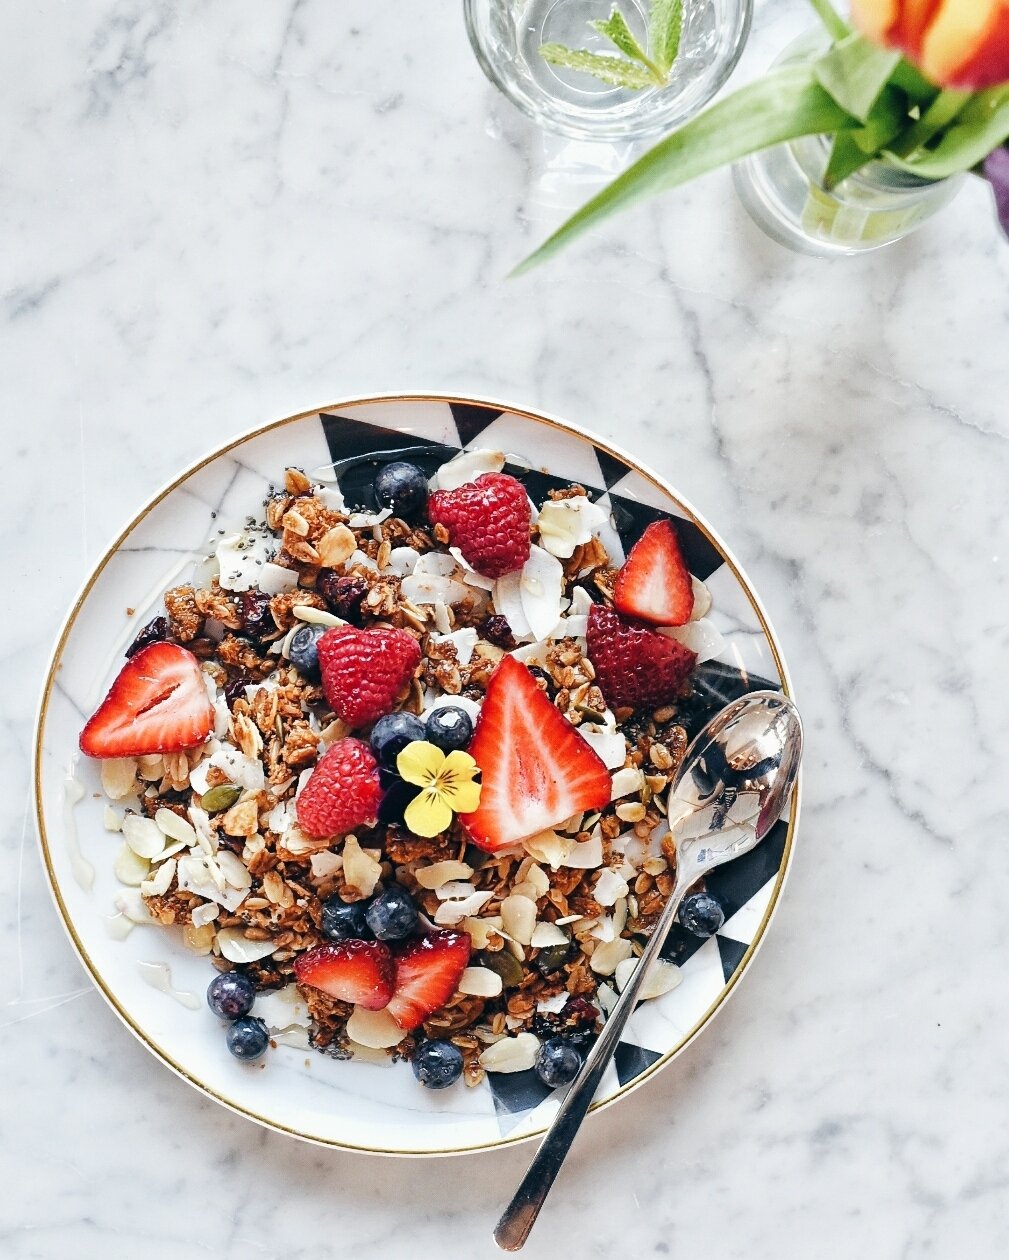 We just can't get enough of our granola and fresh fruit on a Monday morning. 🍓 🍒 🥝 🍌 

🍓🫐 OUR HOUSE MAPLE GRANOLA with fresh berries, coconut and thick Greek yogurt is packed with nutrients and flavour; proof that a healthy Jan can still includ